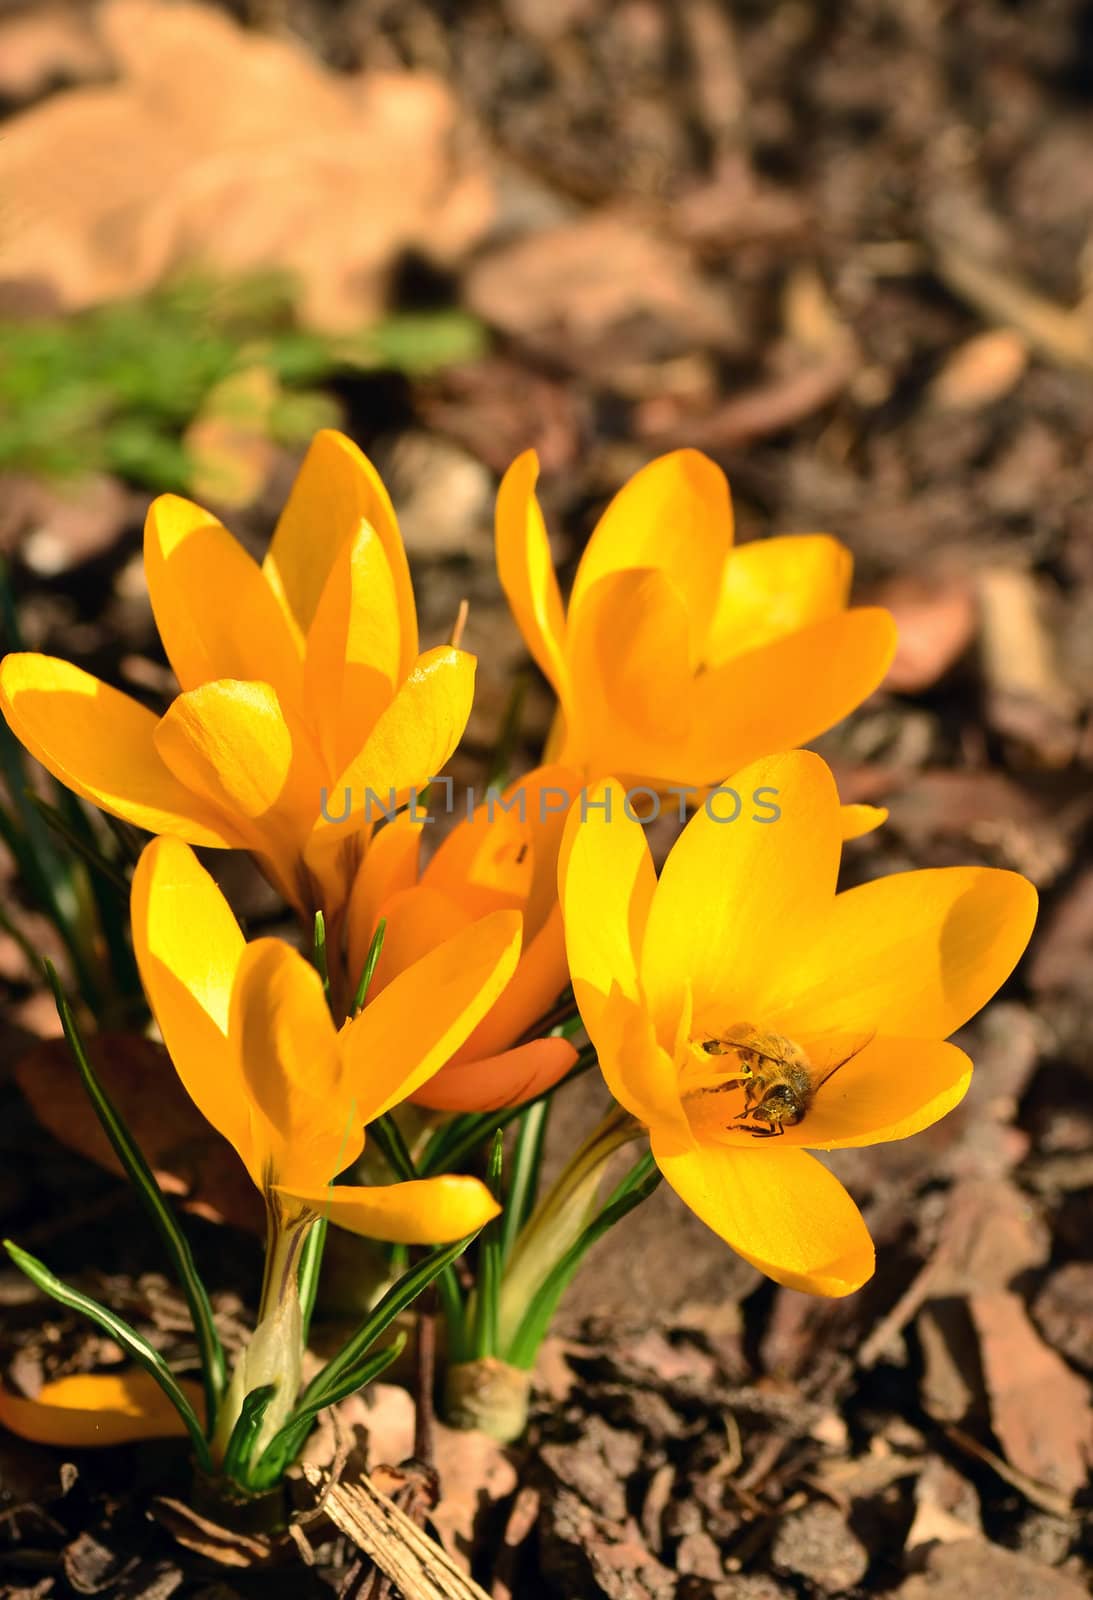 First crocus flowers in spring time. Bee inside one of them.